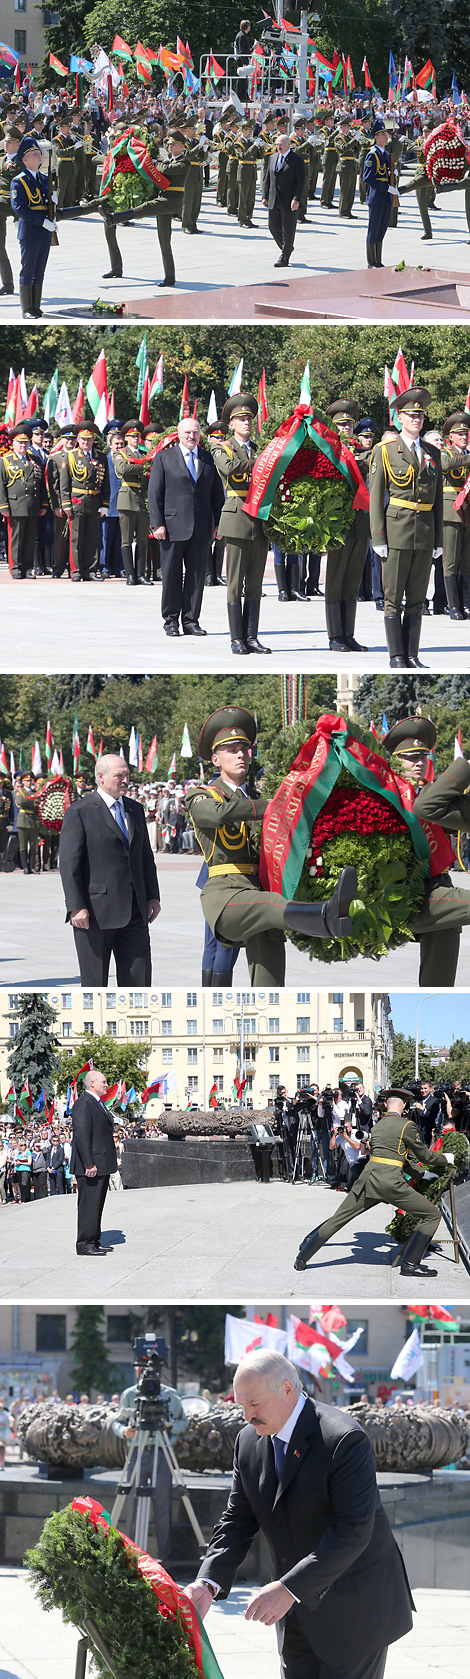 Belarus President Alexander Lukashenko laid a wreath at the Victory Monument in Minsk on the Independence Day on 3 July